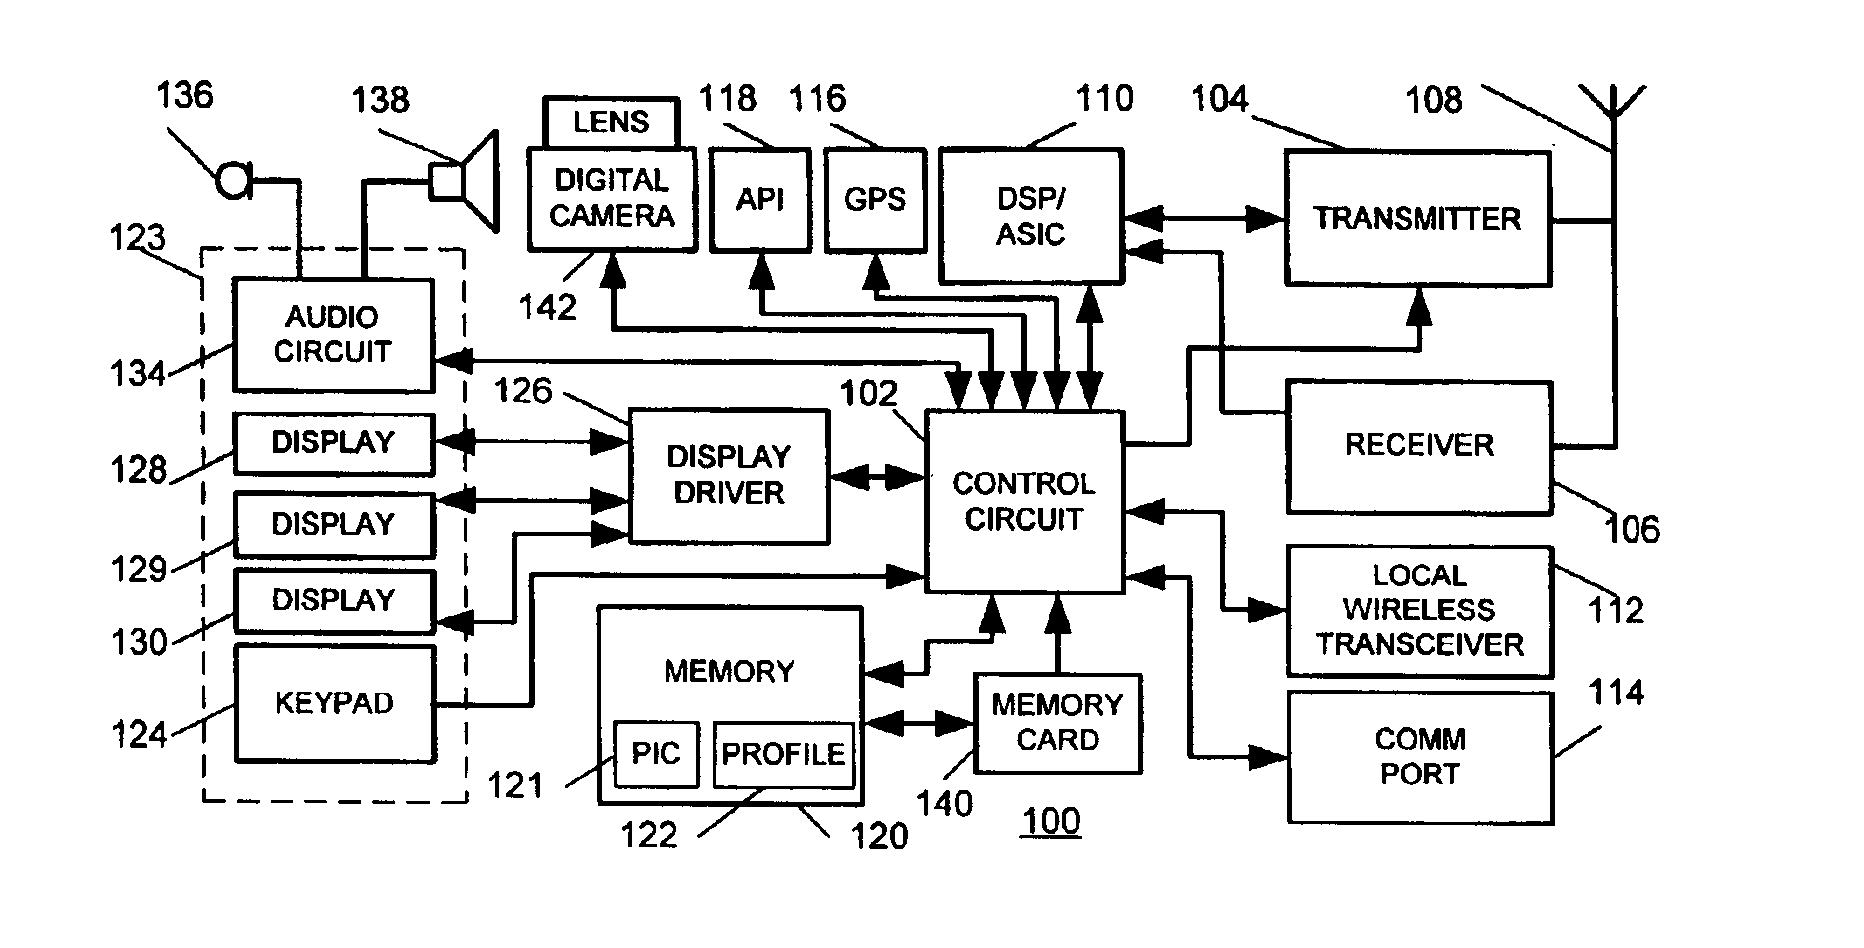 Foldable wireless communication device functioning as a cellular telephone and a personal digital assistant